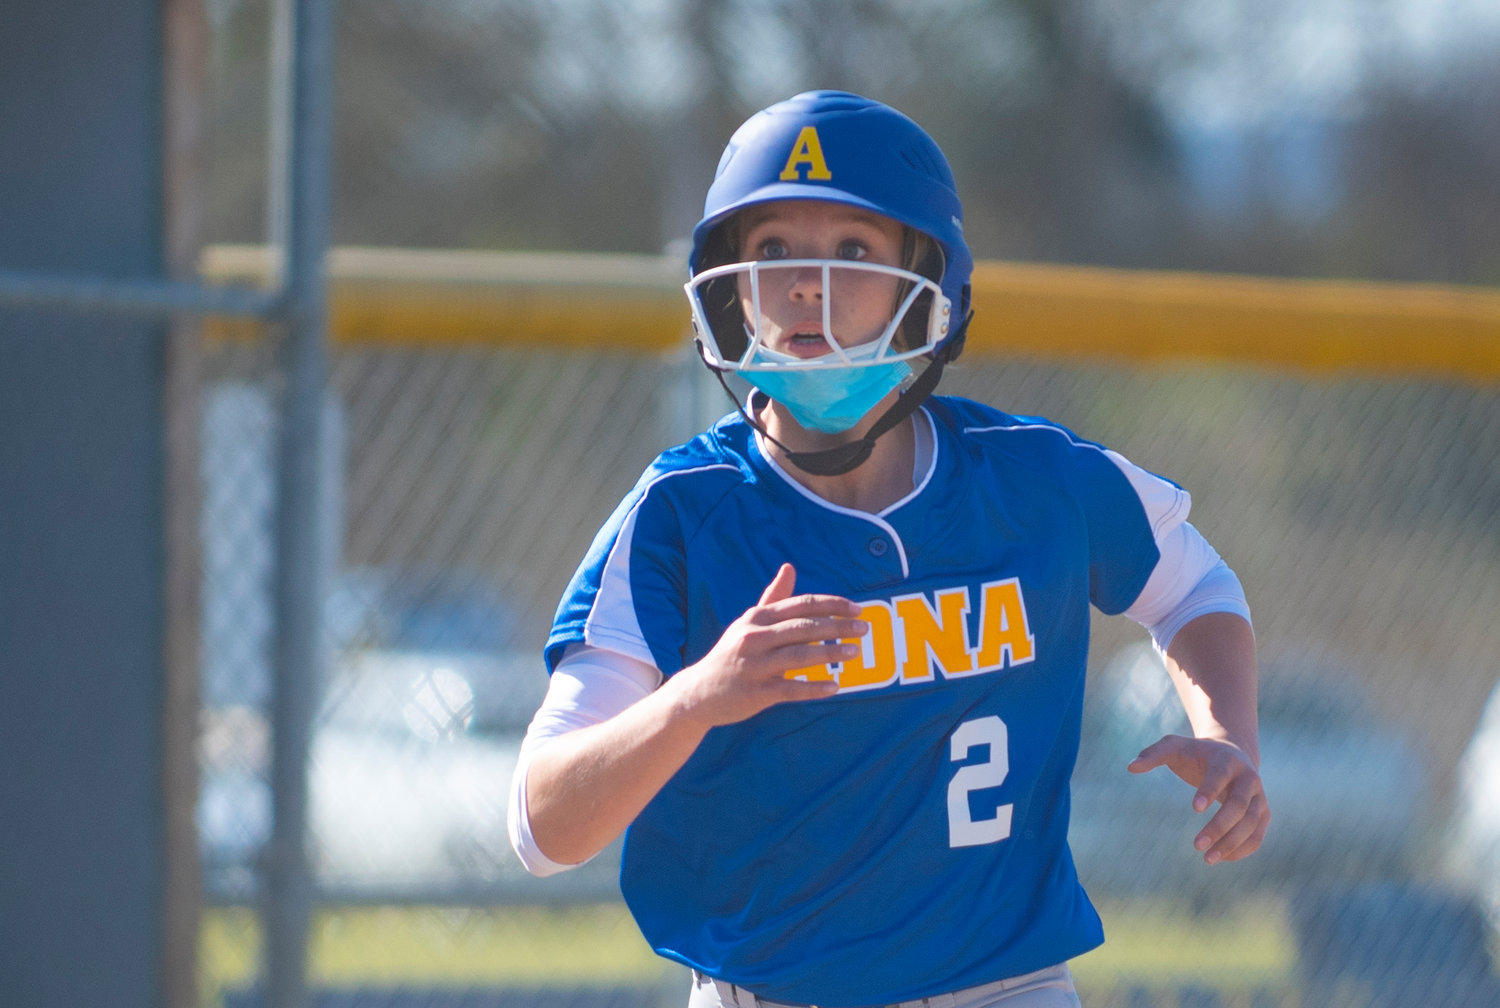 Adna's Ava Simms sees the throw at the plate while running home in the first inning against Toledo on Monday.